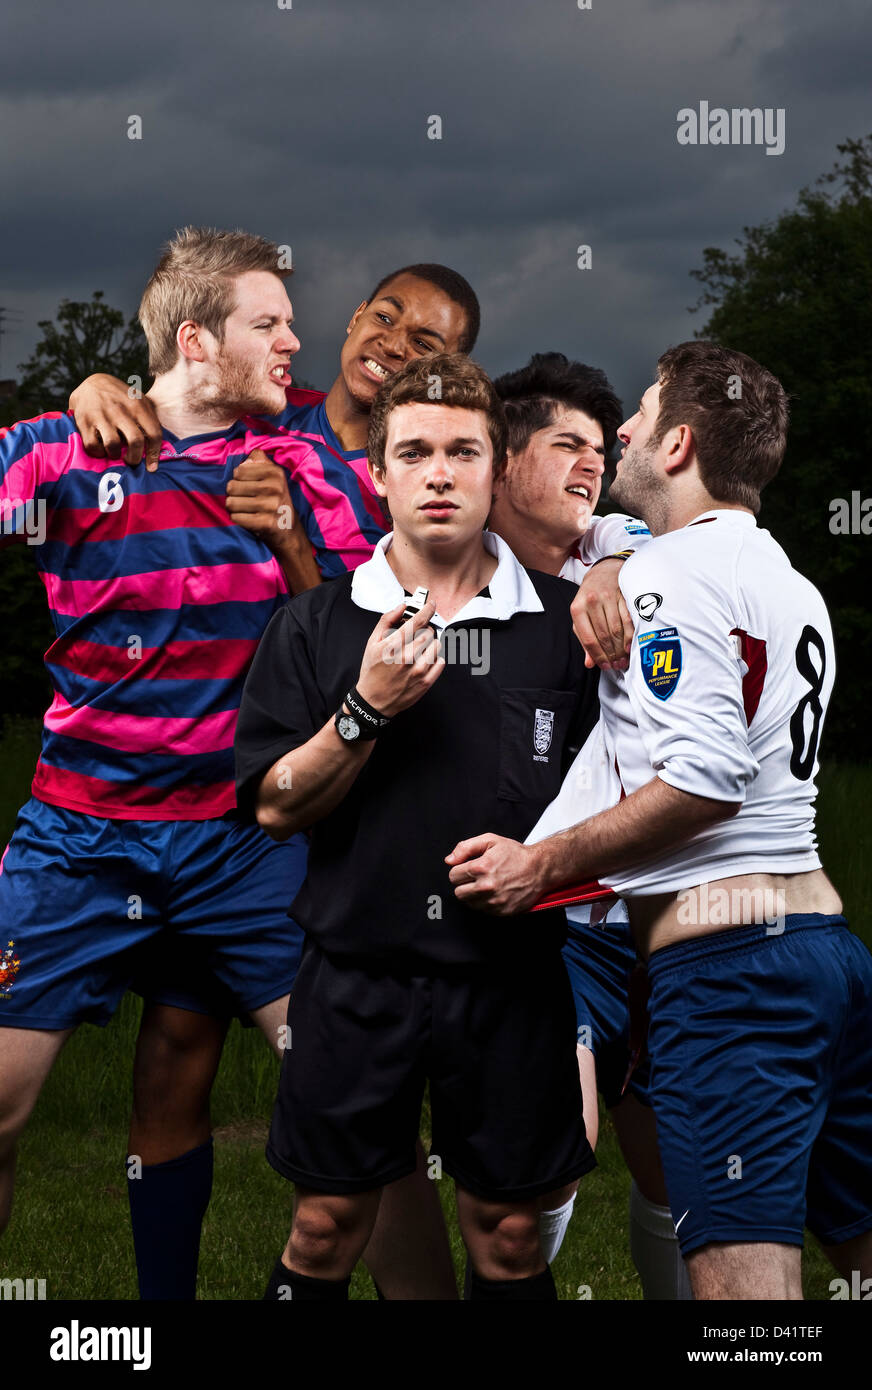 Referee with angry football players Stock Photo